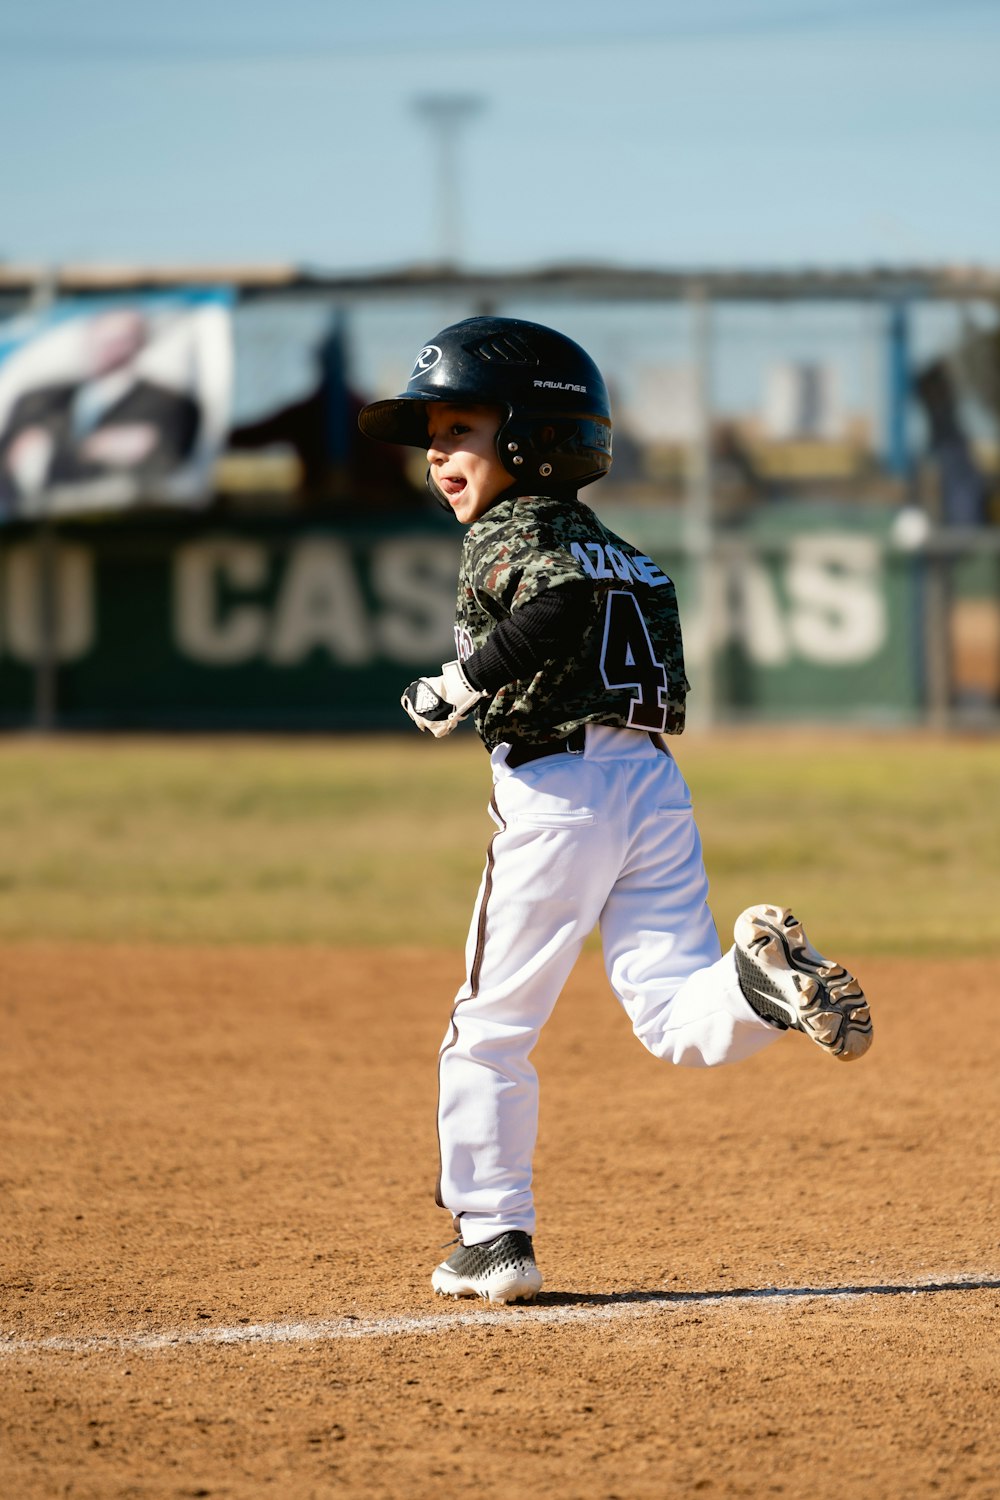 a young boy running to first base during a baseball game